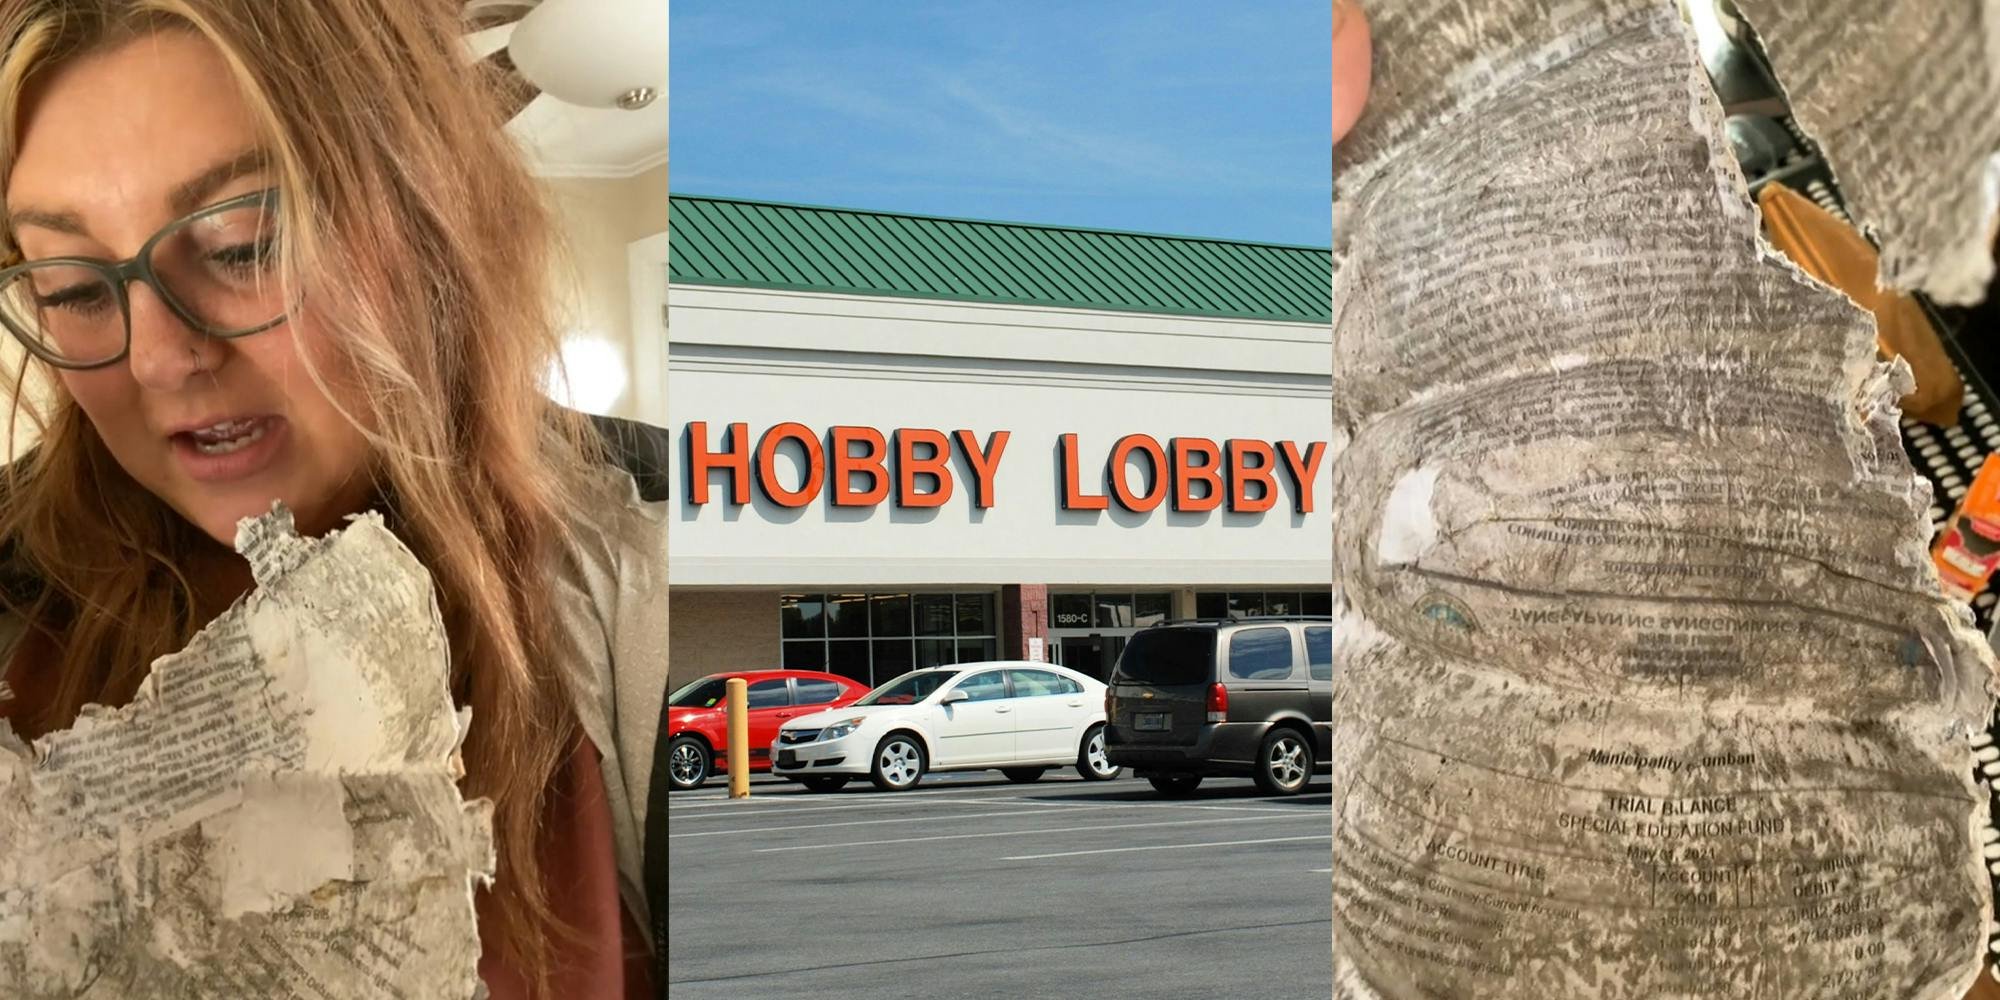 ‘I don't feel like I should have this information’: Hobby Lobby customer’s dog tears up papier-mâché pumpkin. She finds bank account info for someone $3 million in debt inside